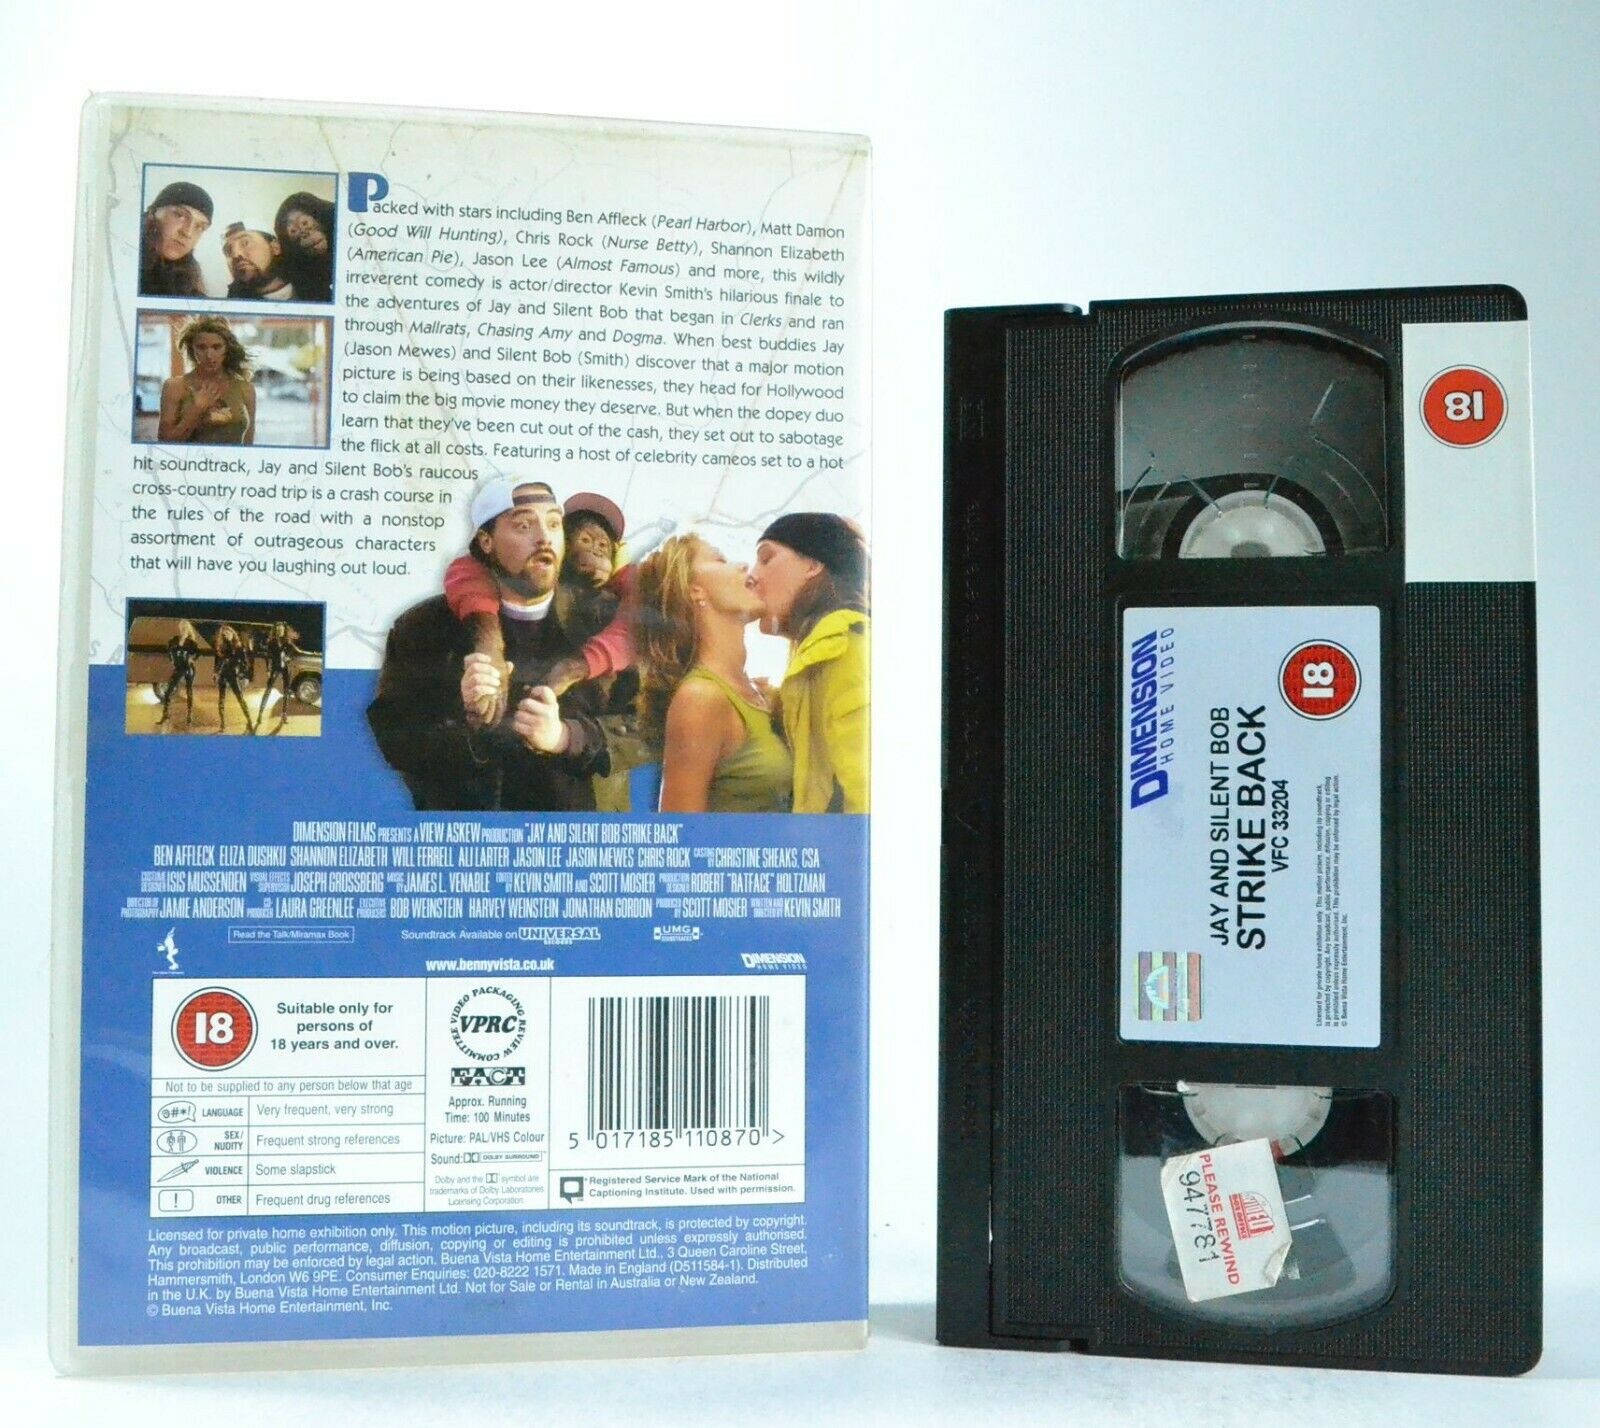 Jay And Silent Bob Strikes Back: Comedy (1998) - Large Box - Kevin Smith - VHS-